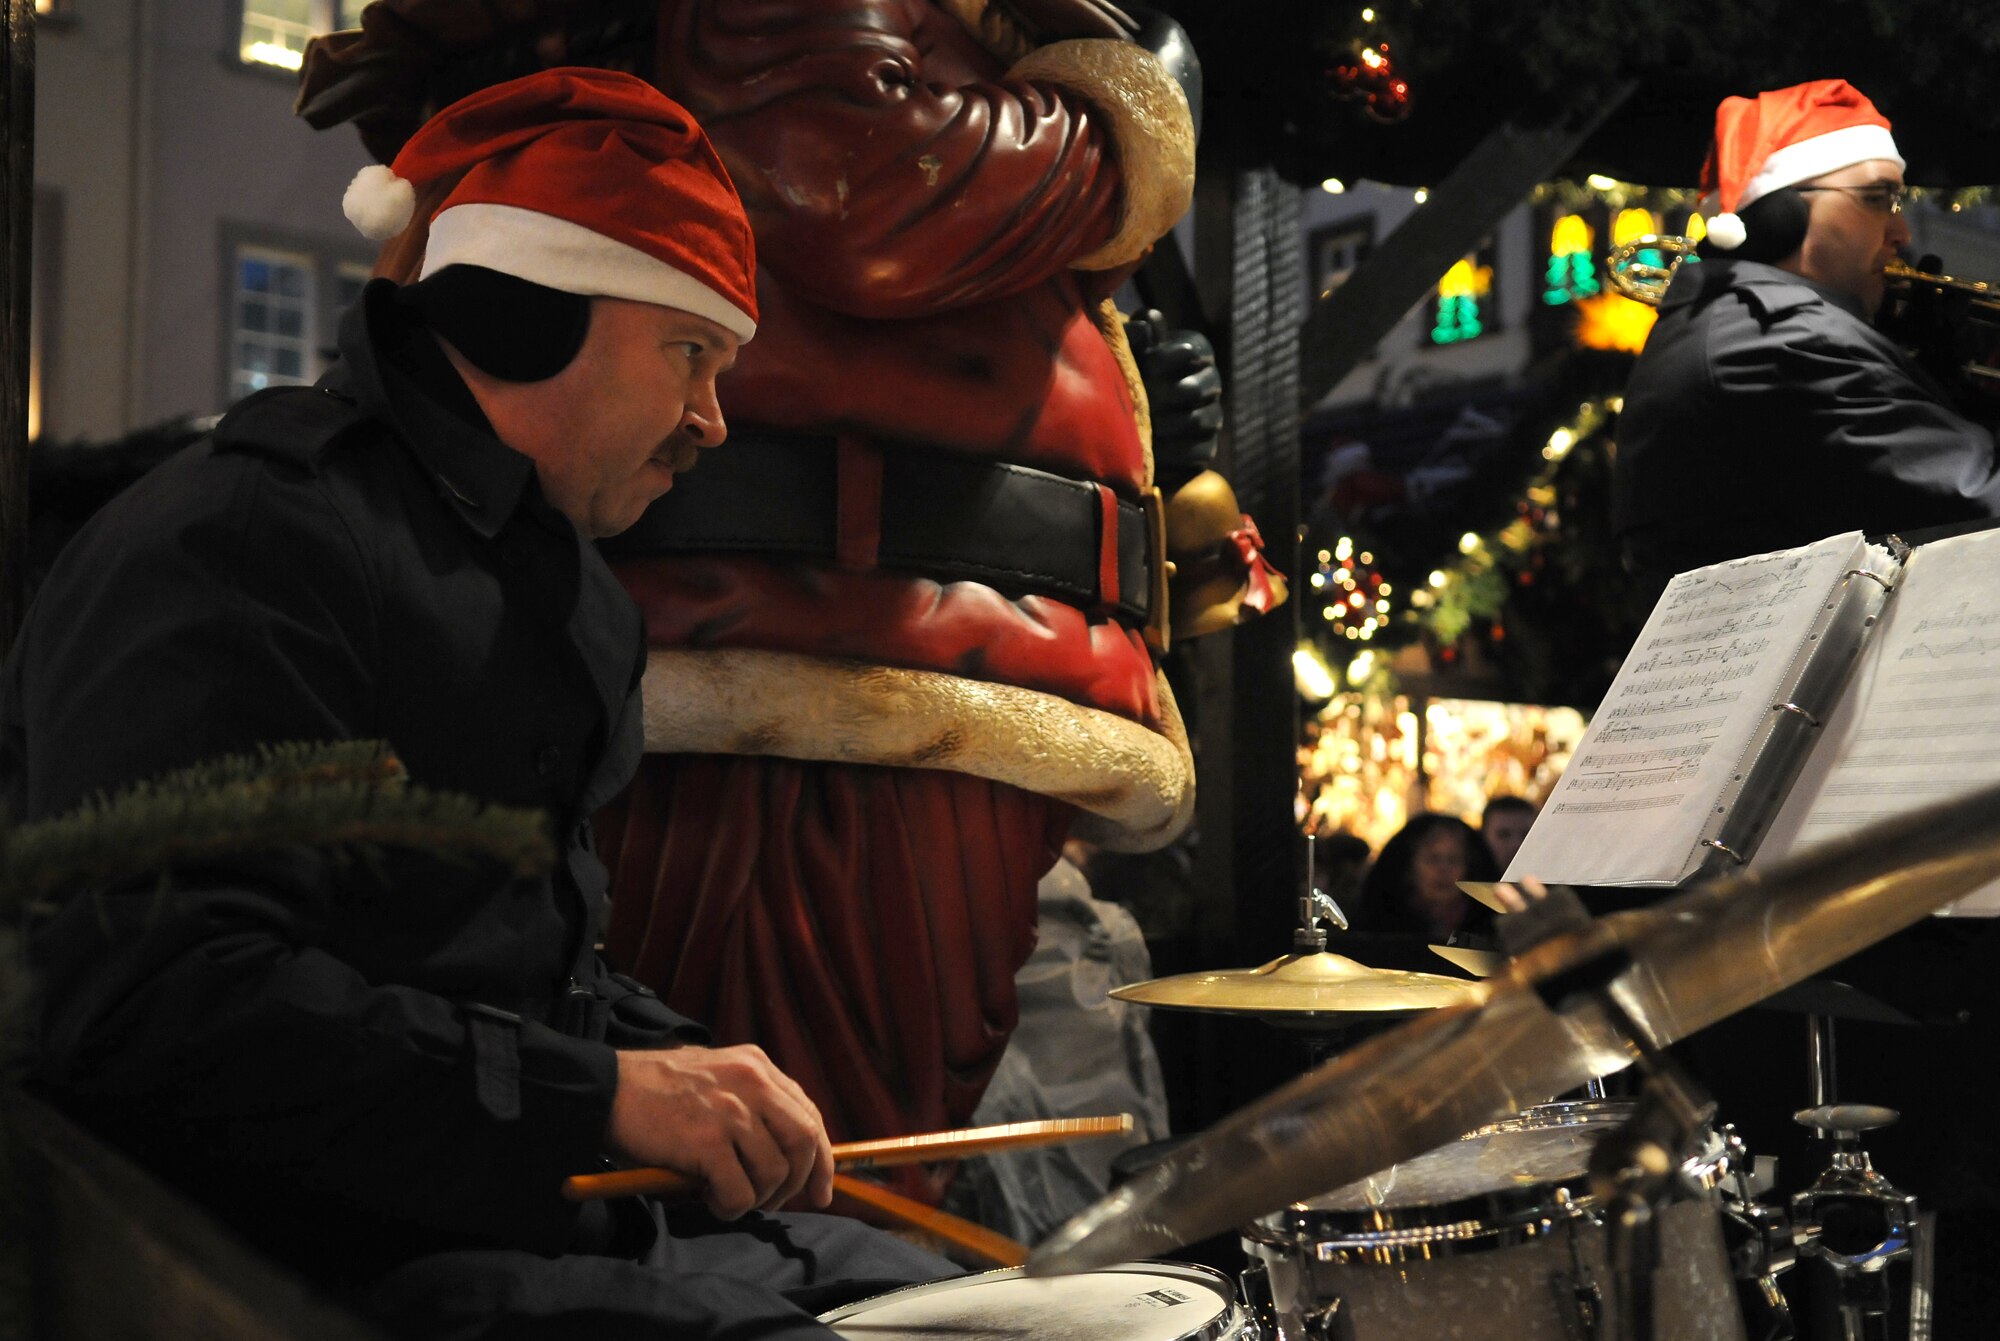 TRIER, Germany -- Master Sgt. James Bartelt, U.S. Air Forces in Europe Band drummer, plays “Winter Wonderland” during a live performance by Five Star Brass Dec. 17 at the Trier Christmas Market. The band entertained crowds of all ages with holiday songs during the concert. (U.S. Air Force photo/Airman 1st Class Nathanael Callon)